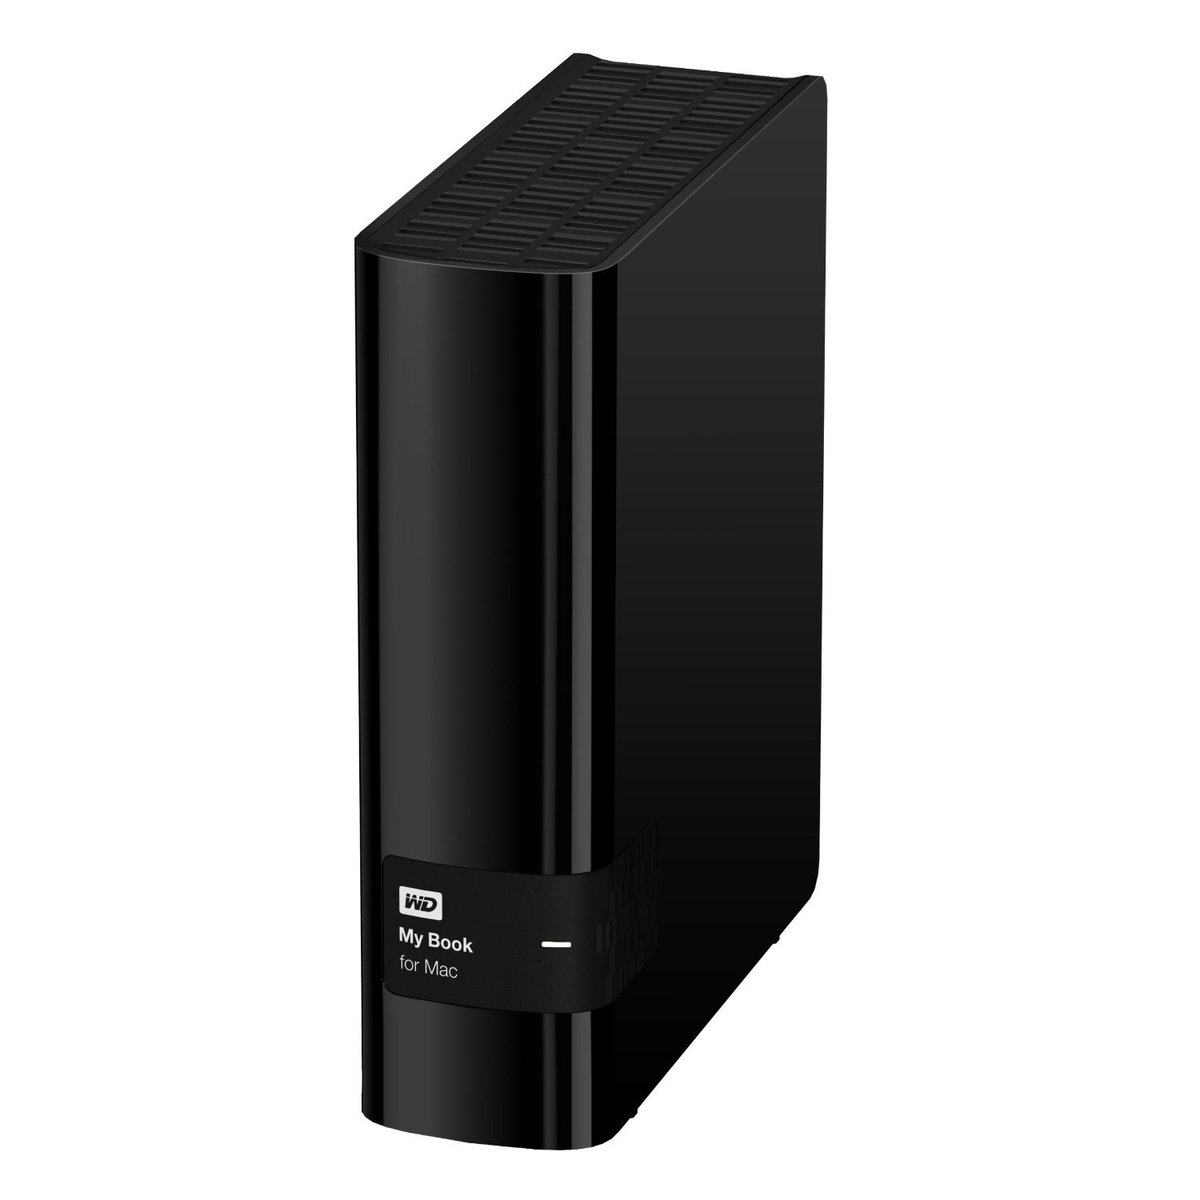 Can I Use Western Digital For Mac And Pc